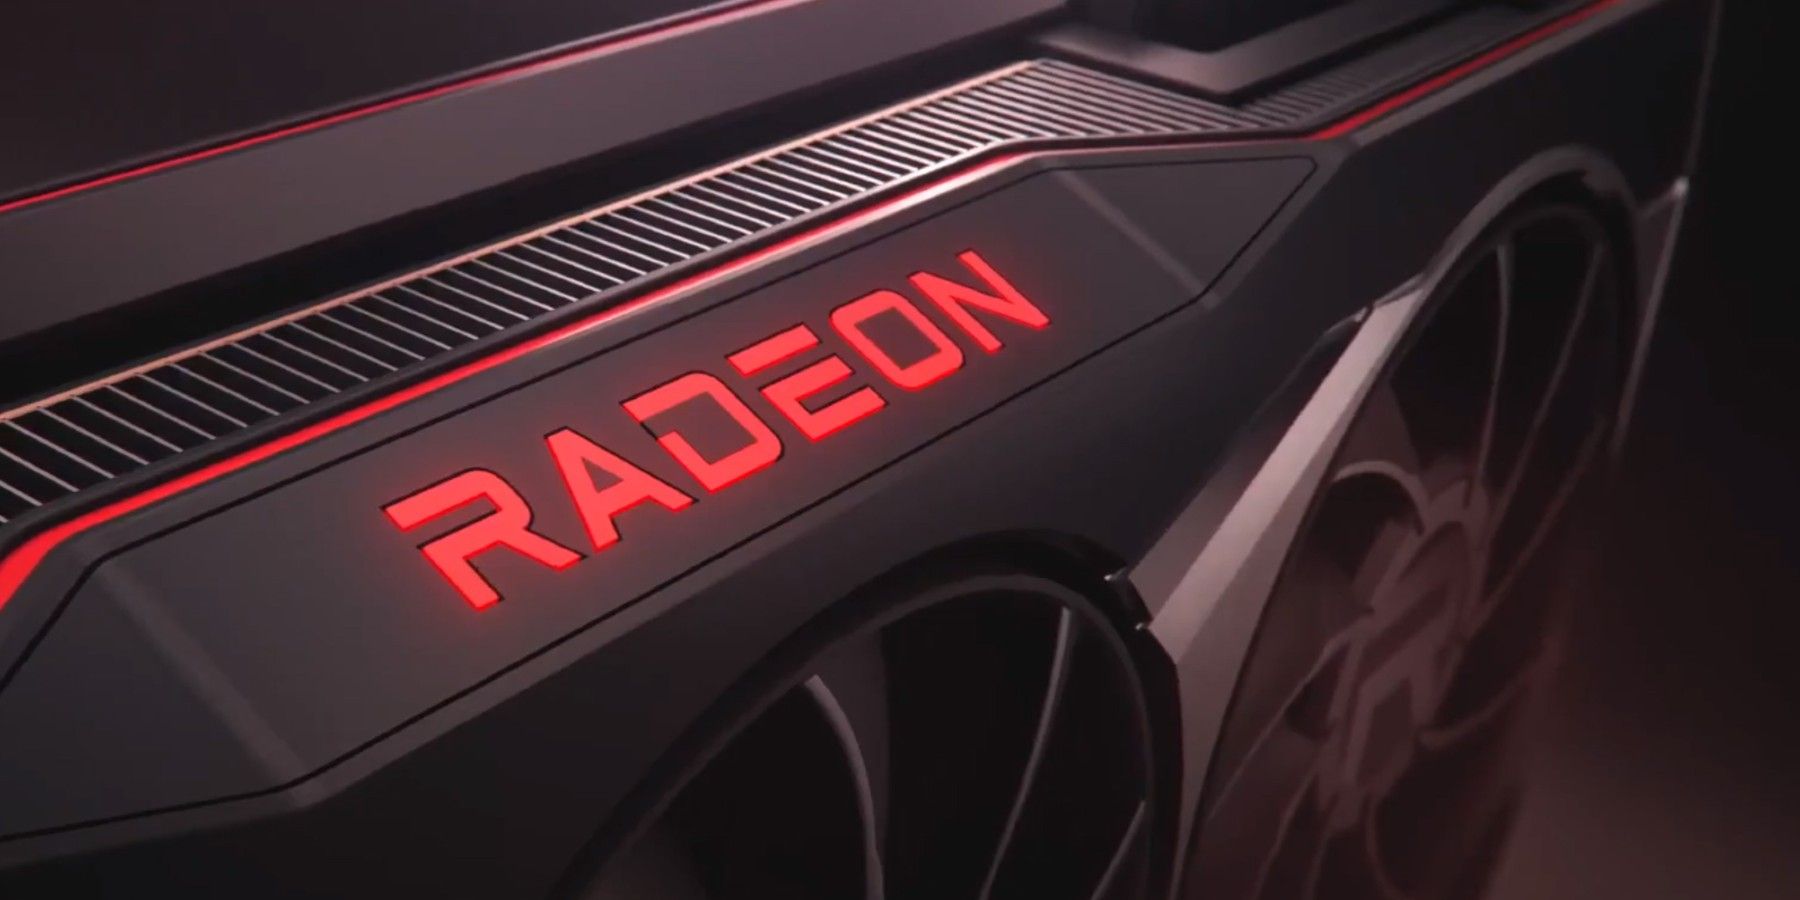 AMD Announces New $200 Graphics Card